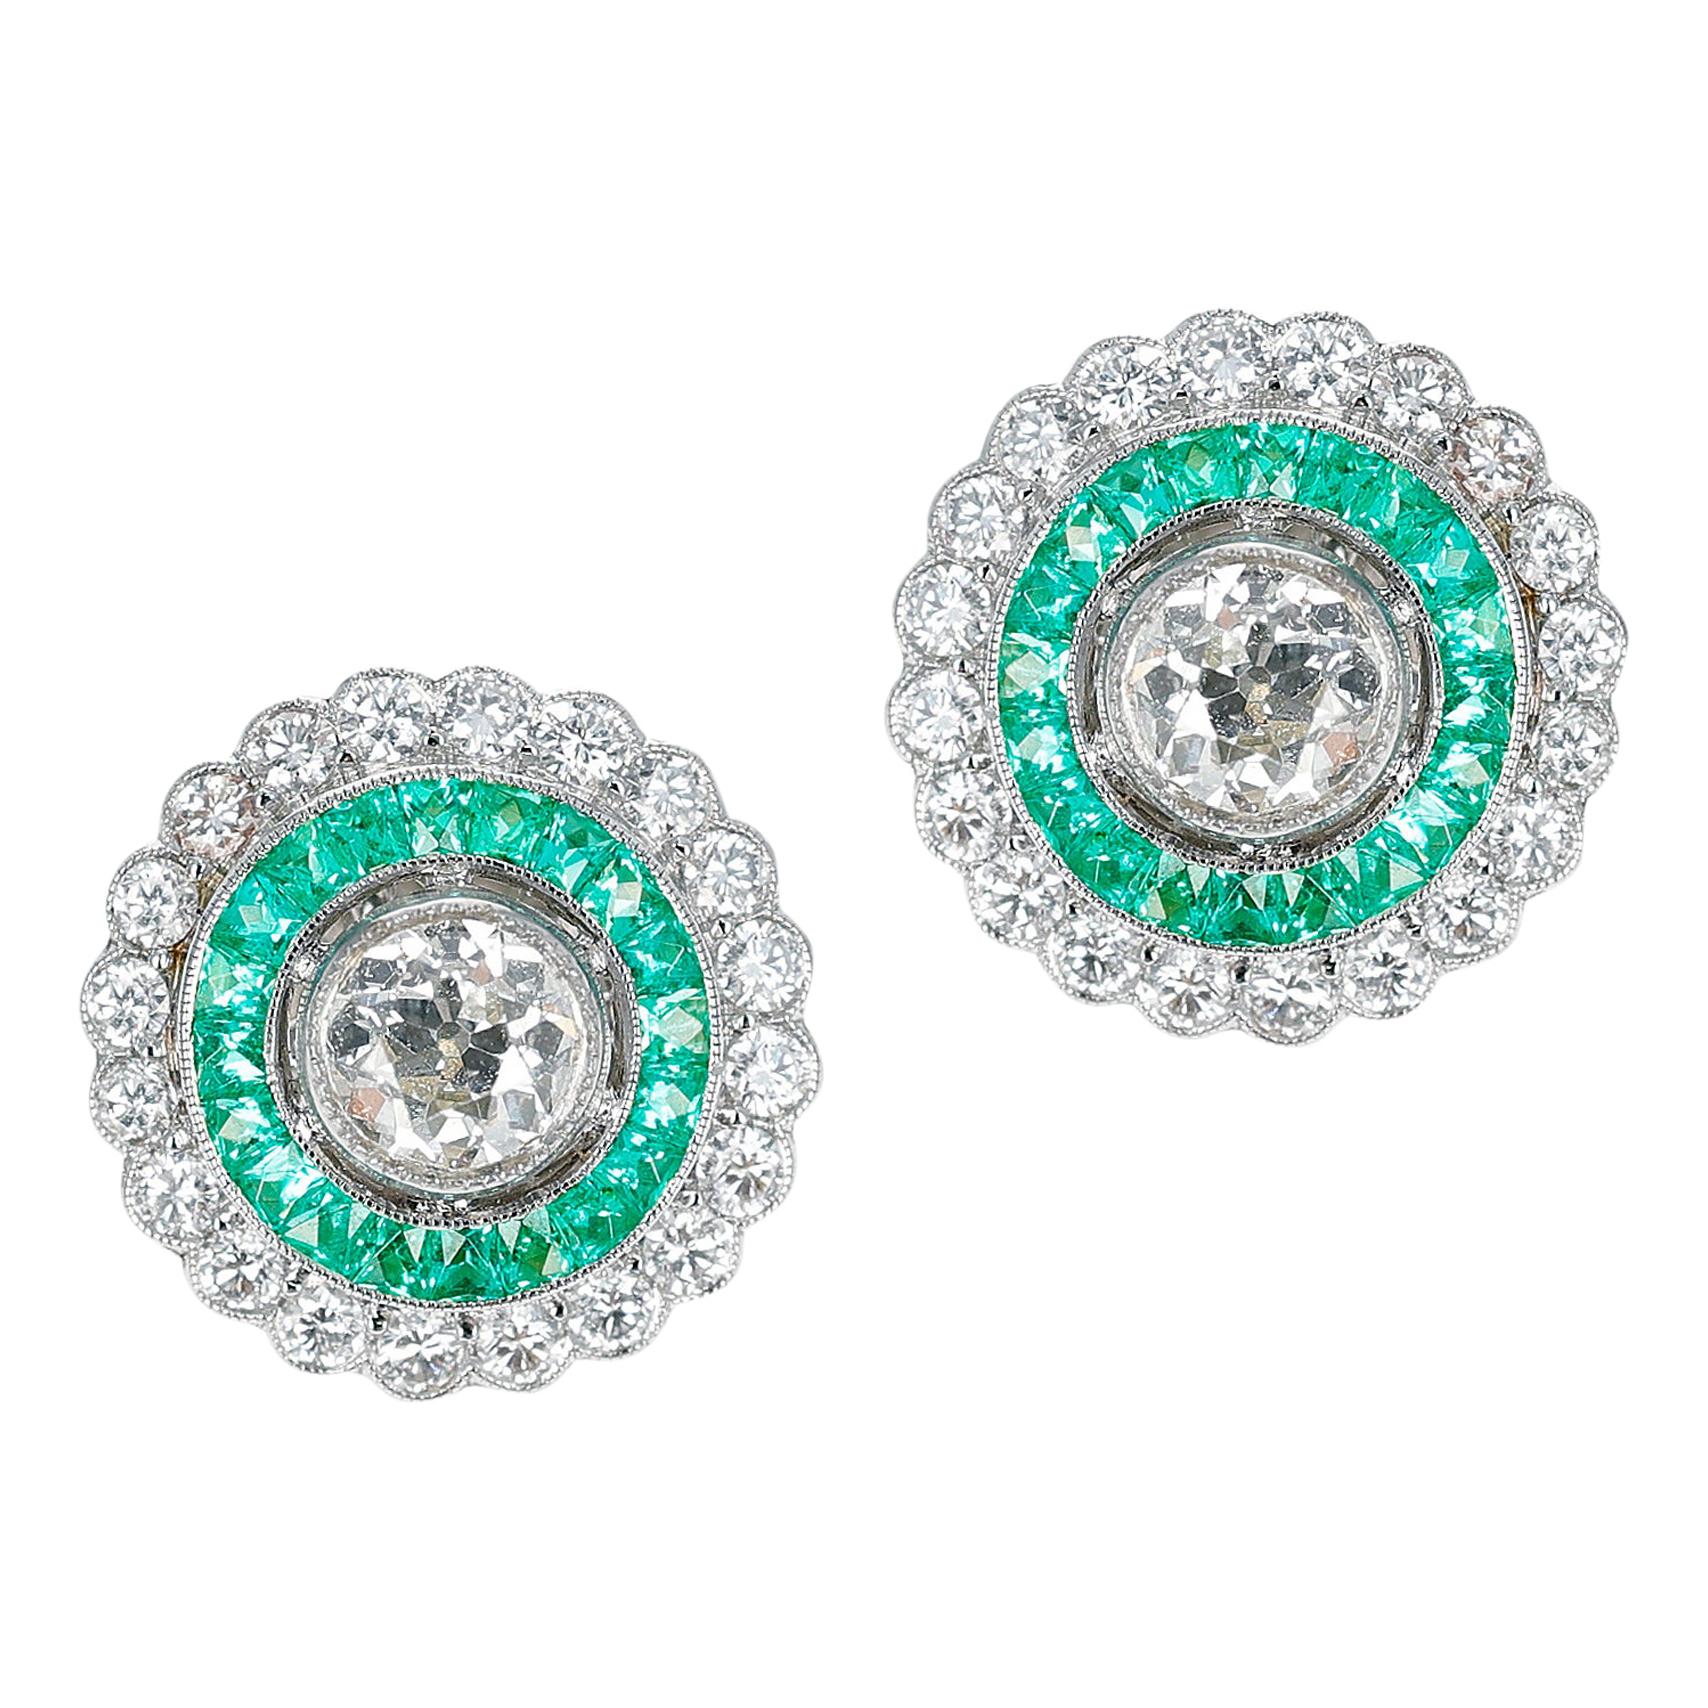 Art Deco Style 0.70 Ct. Each Diamond and Channel Set Emerald Earrings, Platinum For Sale